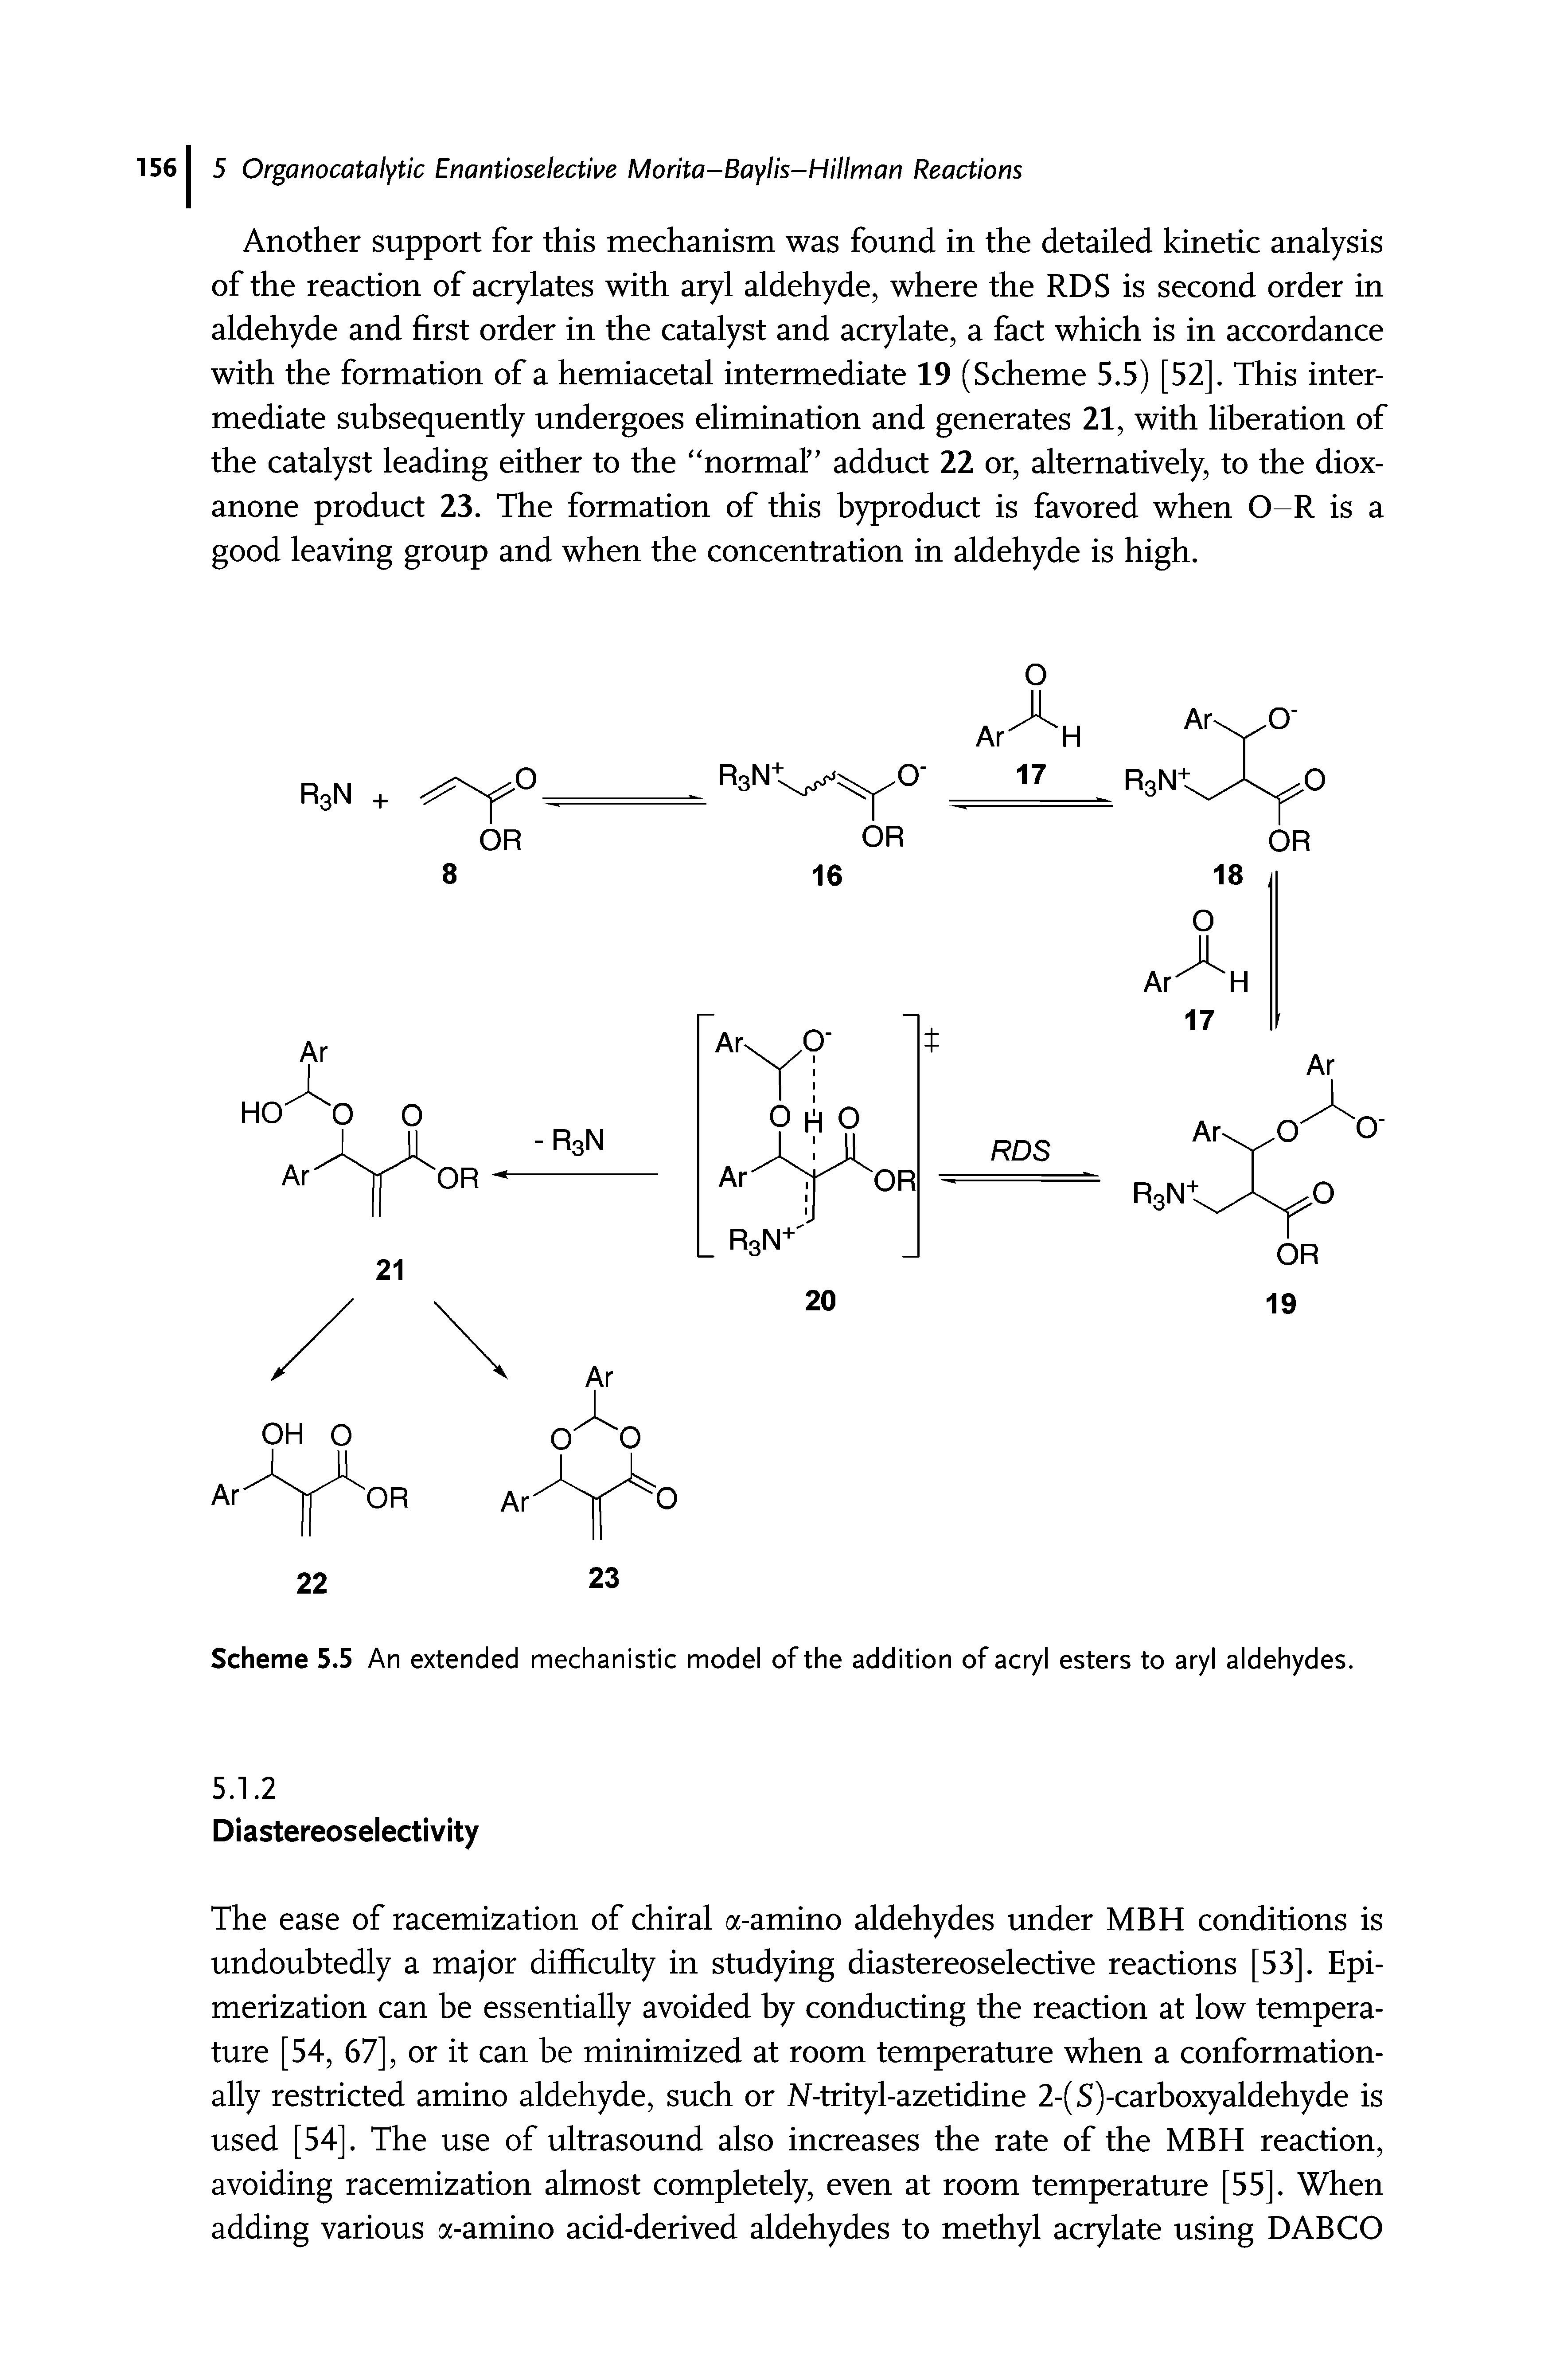 Scheme 5.5 An extended mechanistic model of the addition of acryl esters to aryl aldehydes.